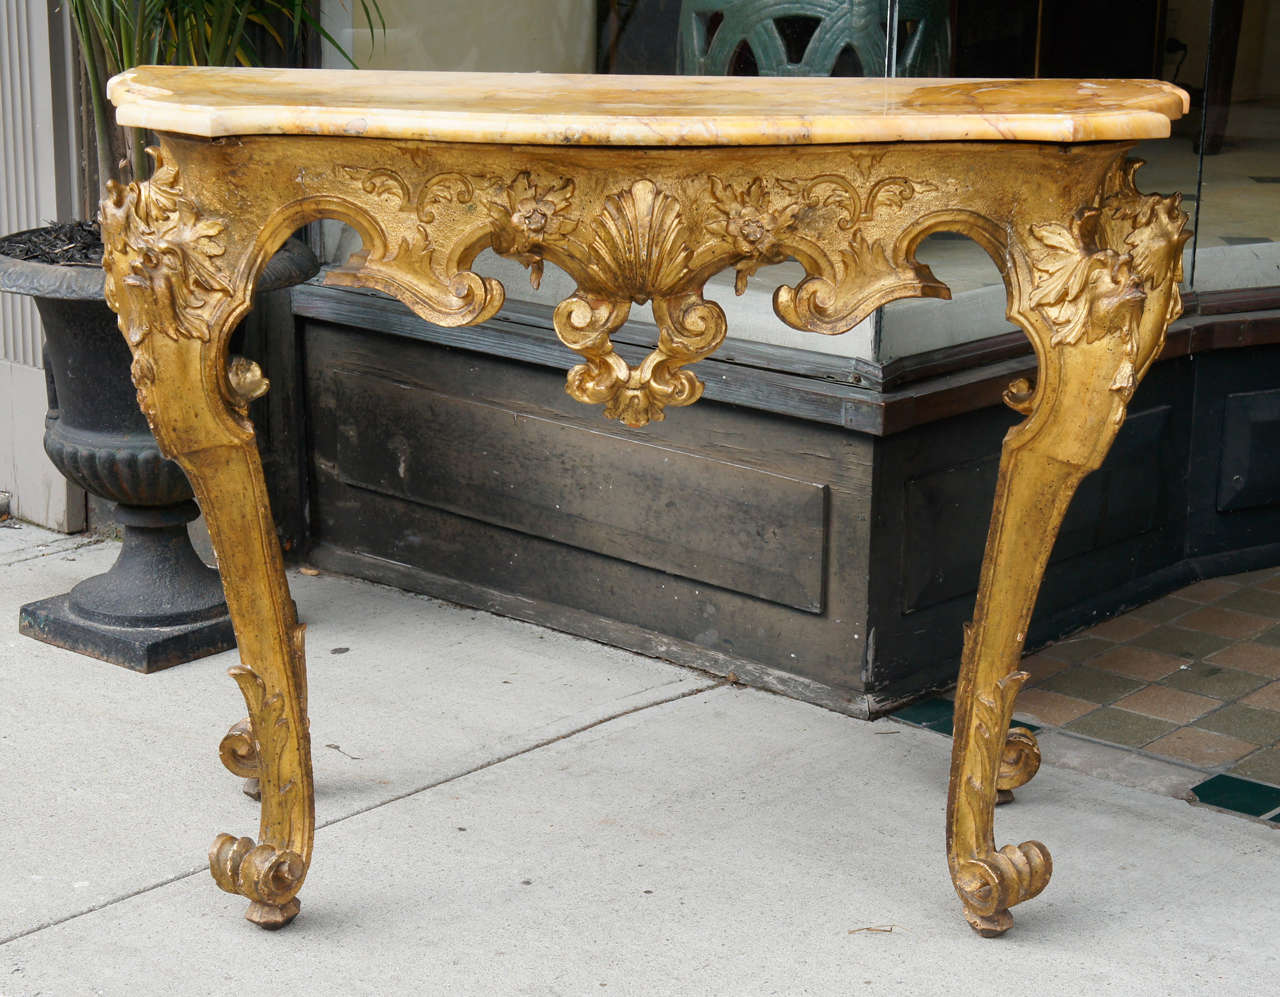 This Roman table made in the Baroque taste is a fine example of the type of furniture made for stylish and demanding customers in the eternal city. Made in the late 17th century to early 18th century of carved and gilded wood the gilded surface and